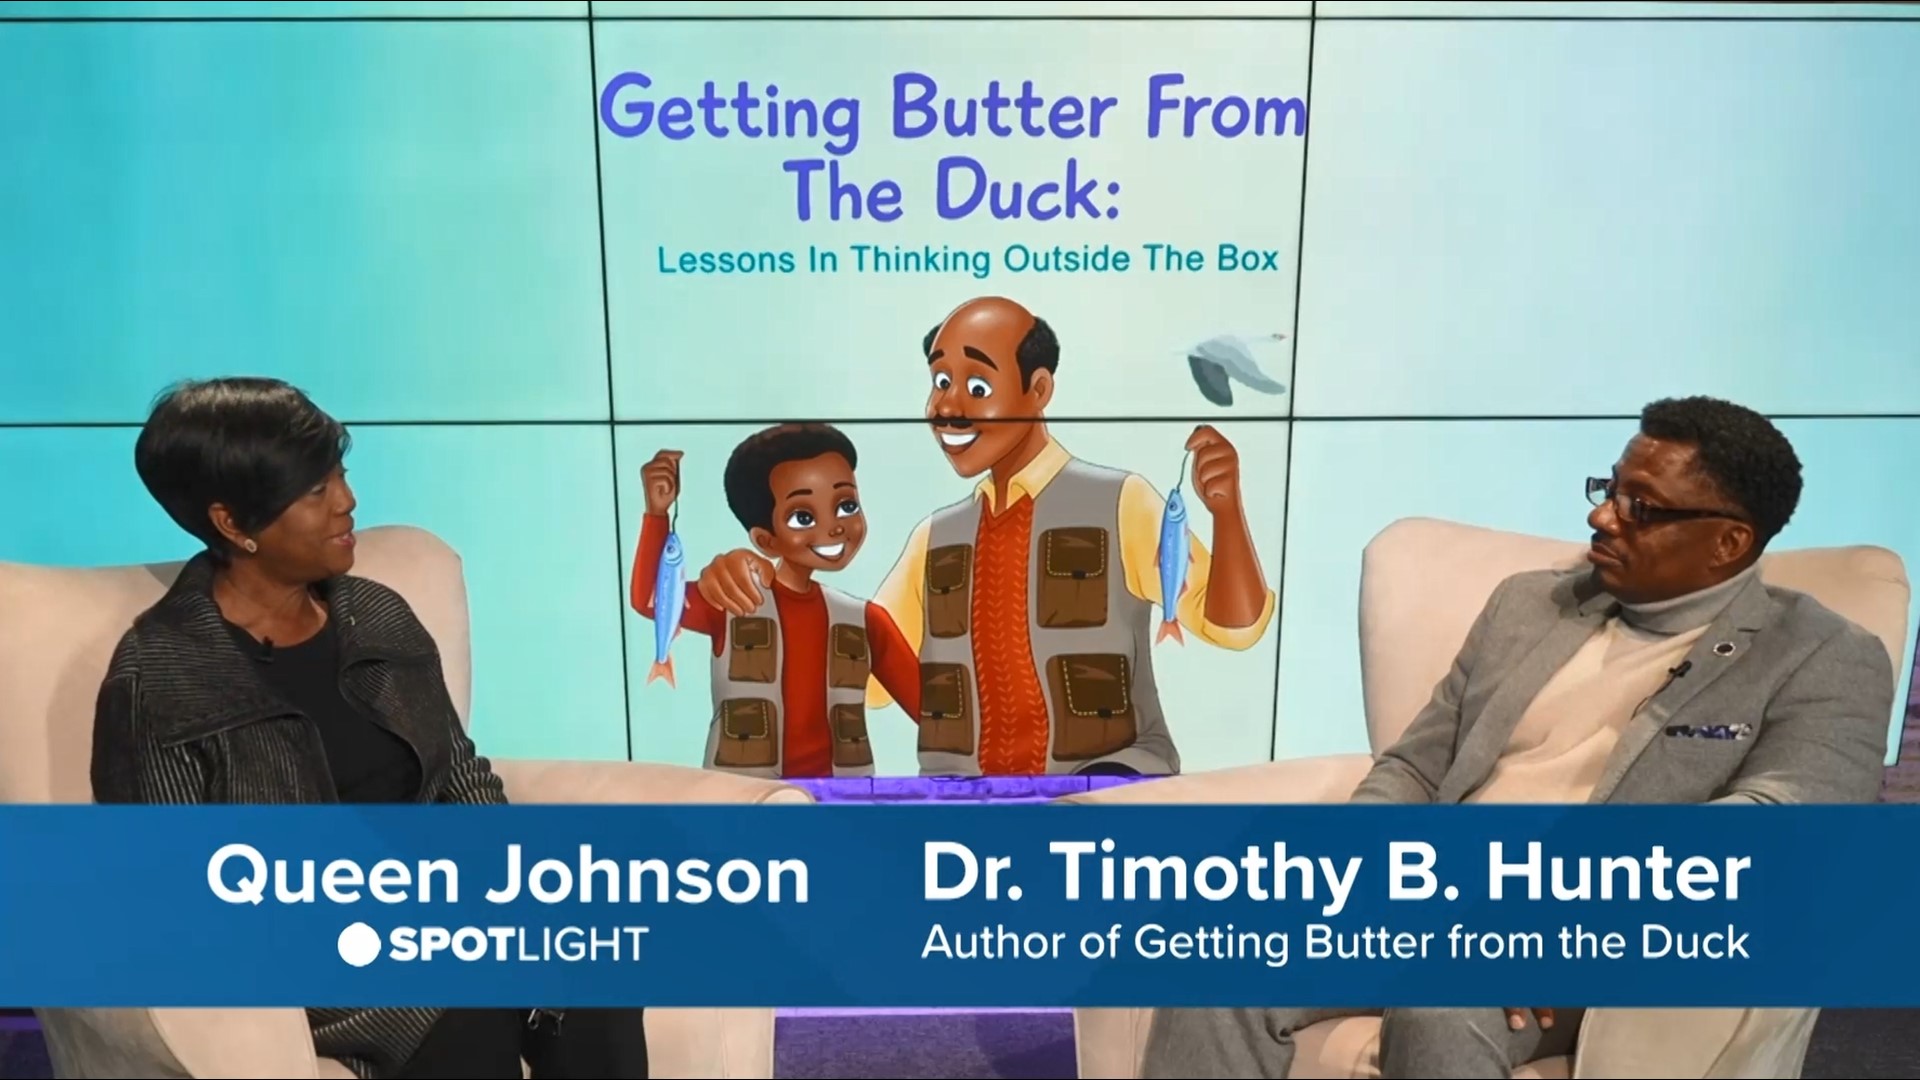 Hear about Dr. Timothy B. Hunter's new book